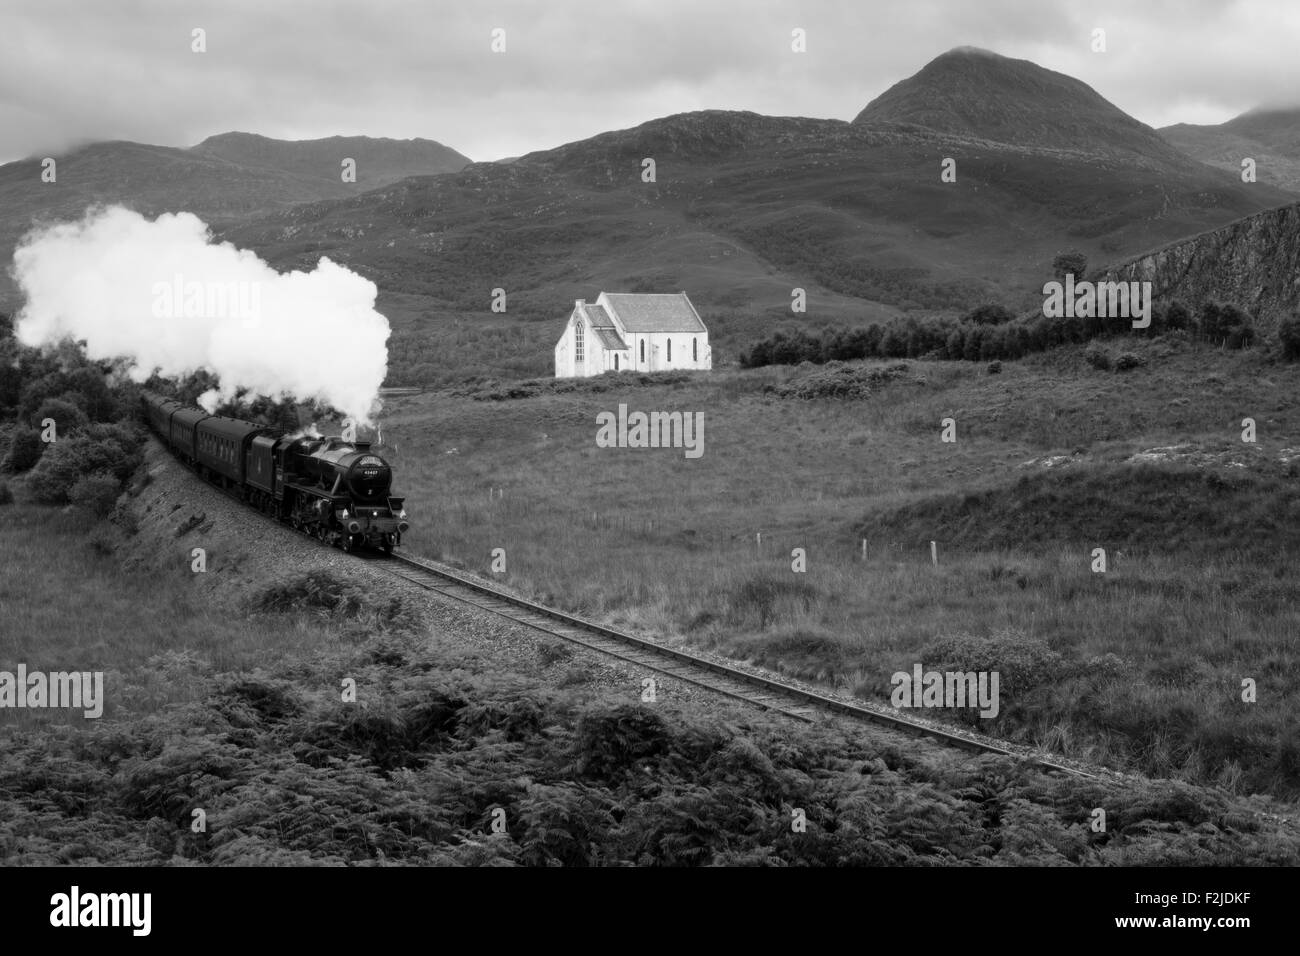 The Jacobite Steam Train travelling from Fort William to Mallaig in the west highlands of Scotland in the UK Stock Photo